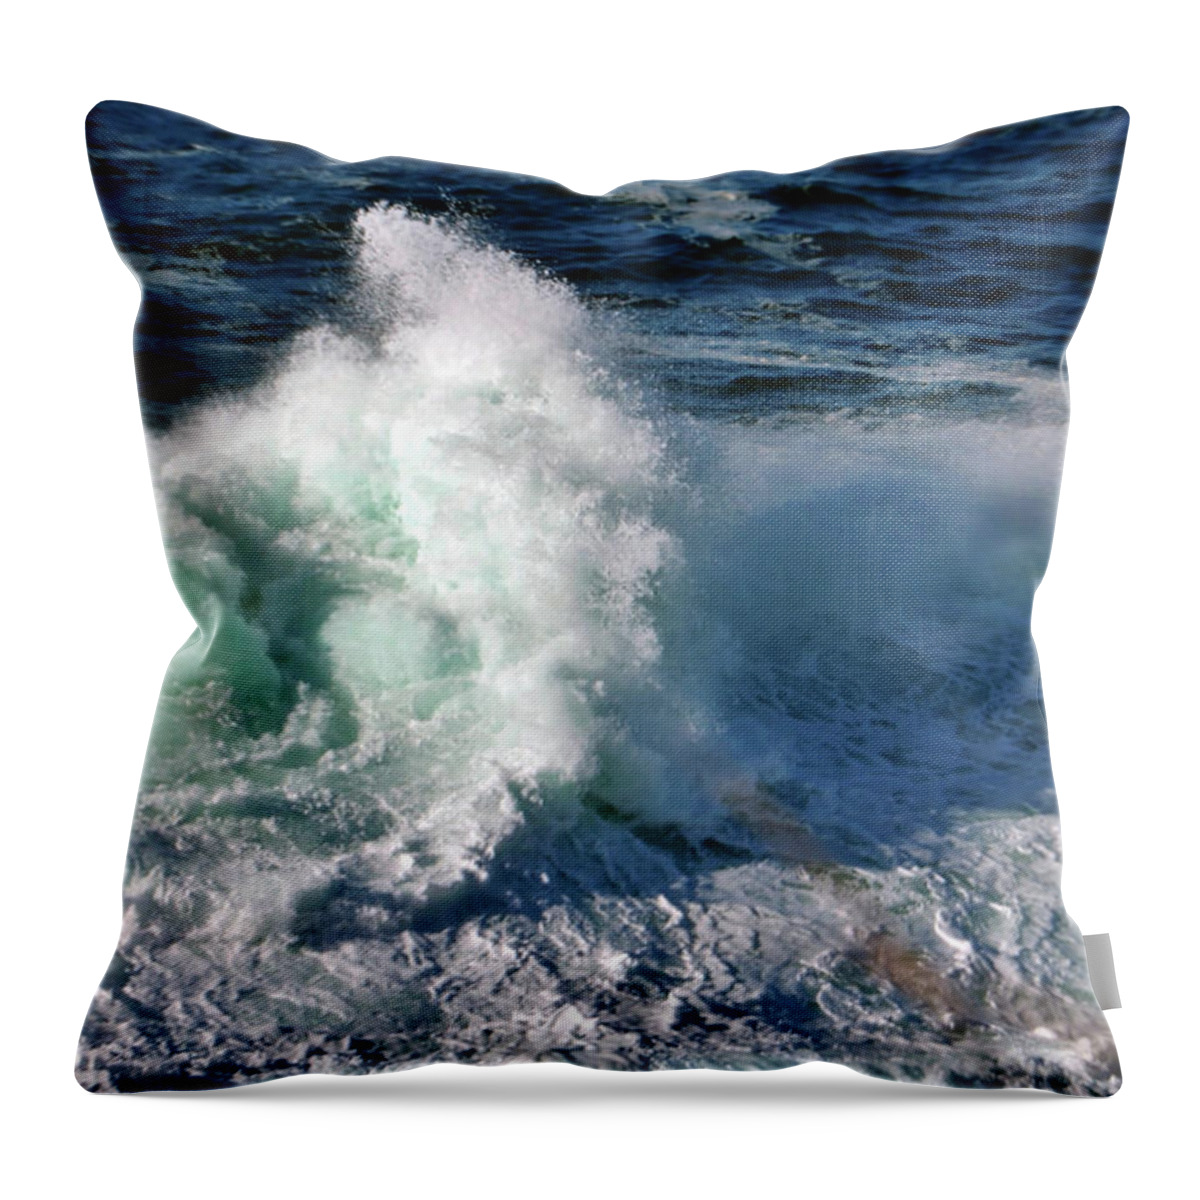 Ocean Throw Pillow featuring the photograph Wave and Rock by William Rockwell